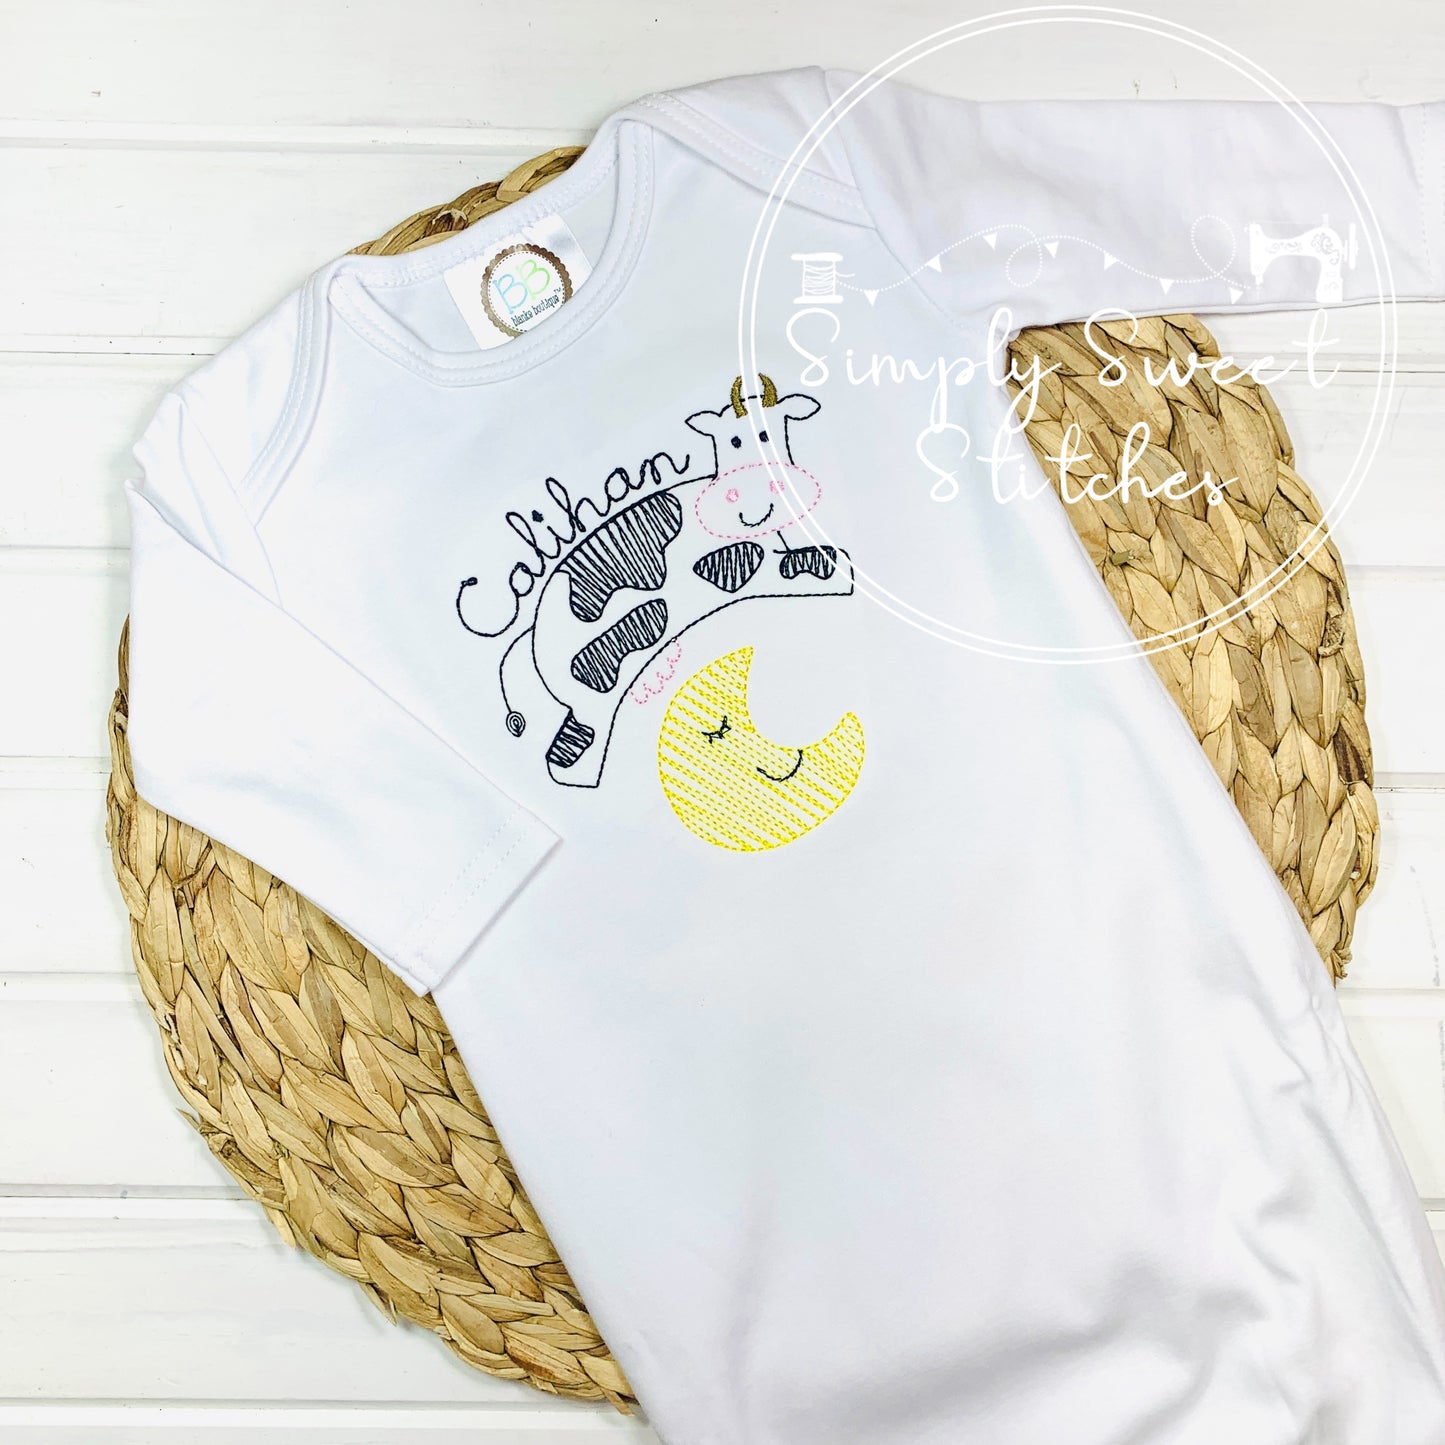 2140 - COW JUMPED OVER THE MOON - SKETCH BABY GOWN